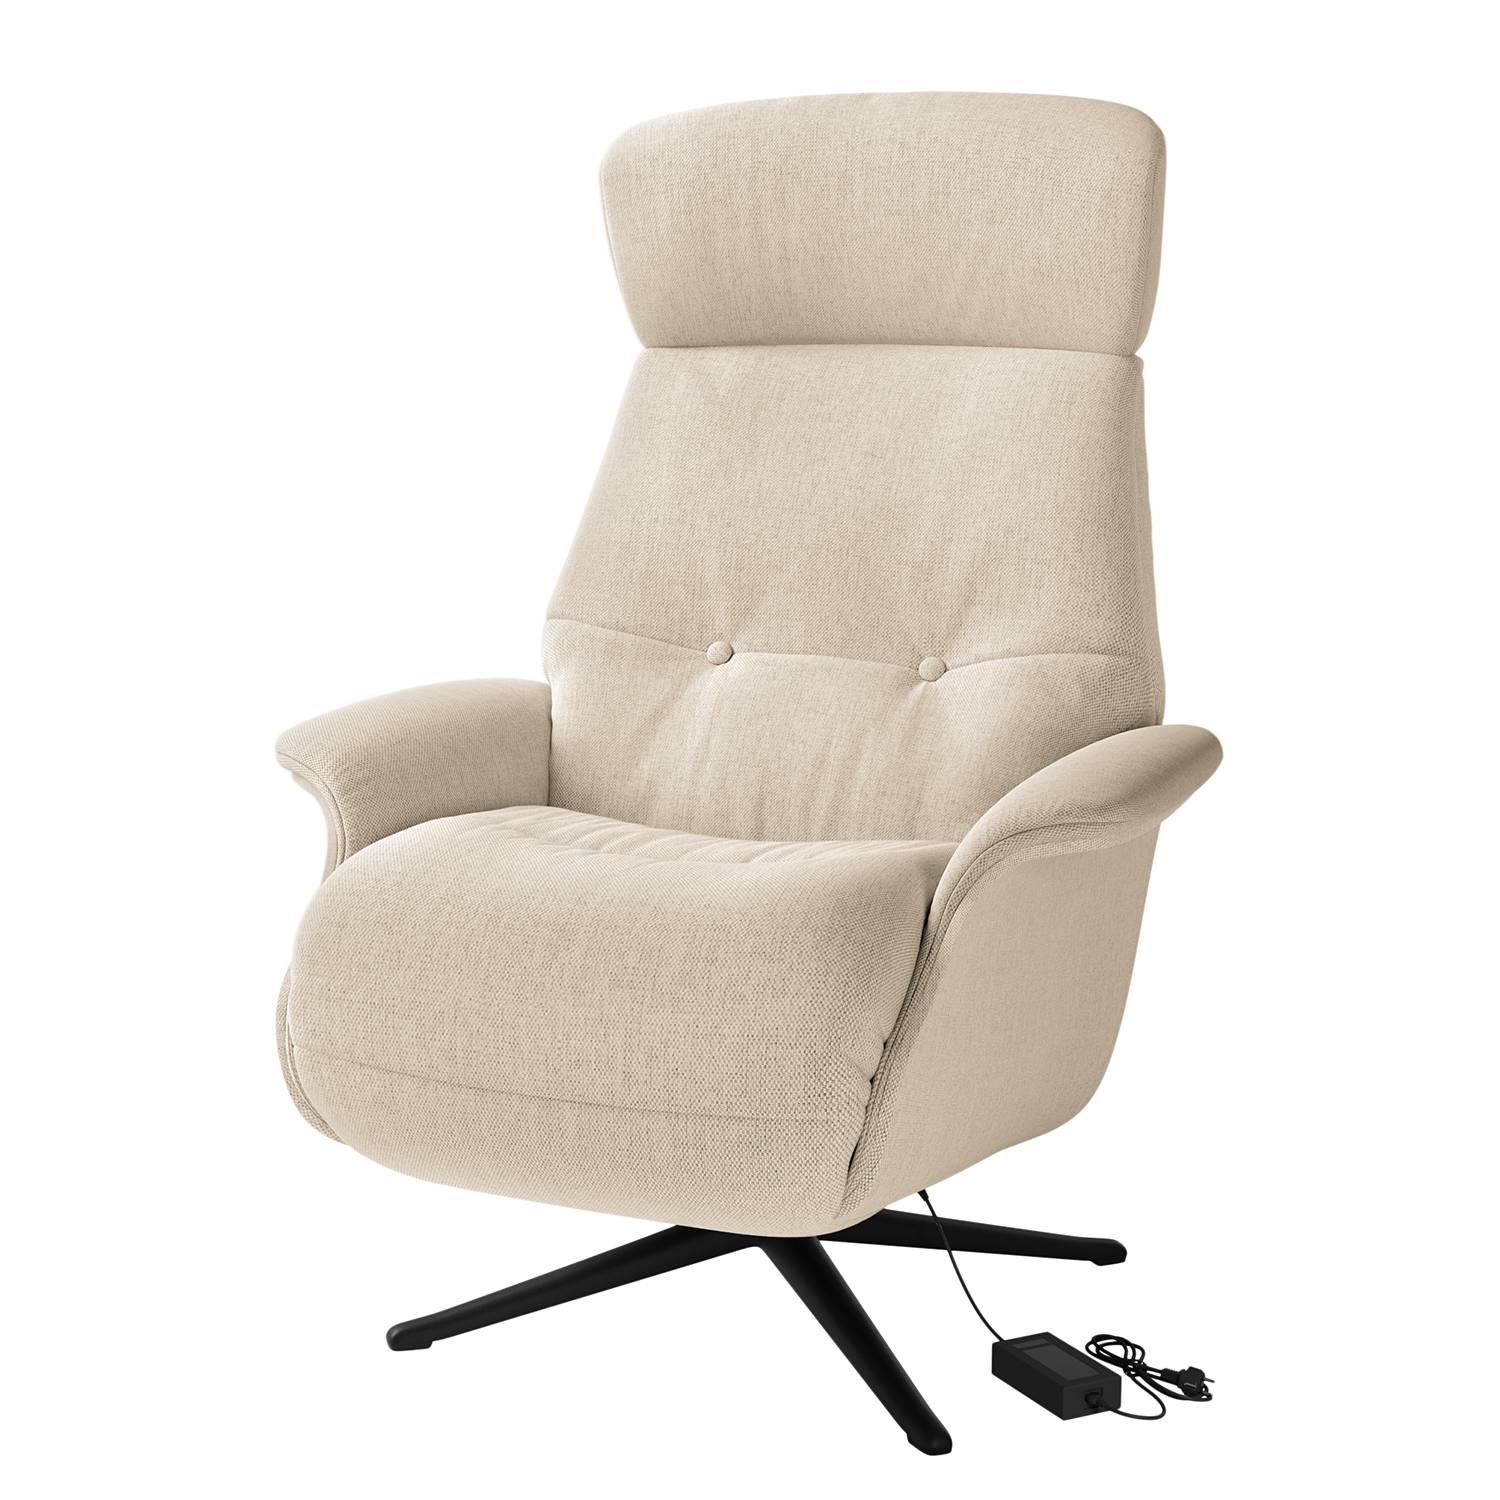 Image of Fauteuil relax Anderson III 000000001000131460